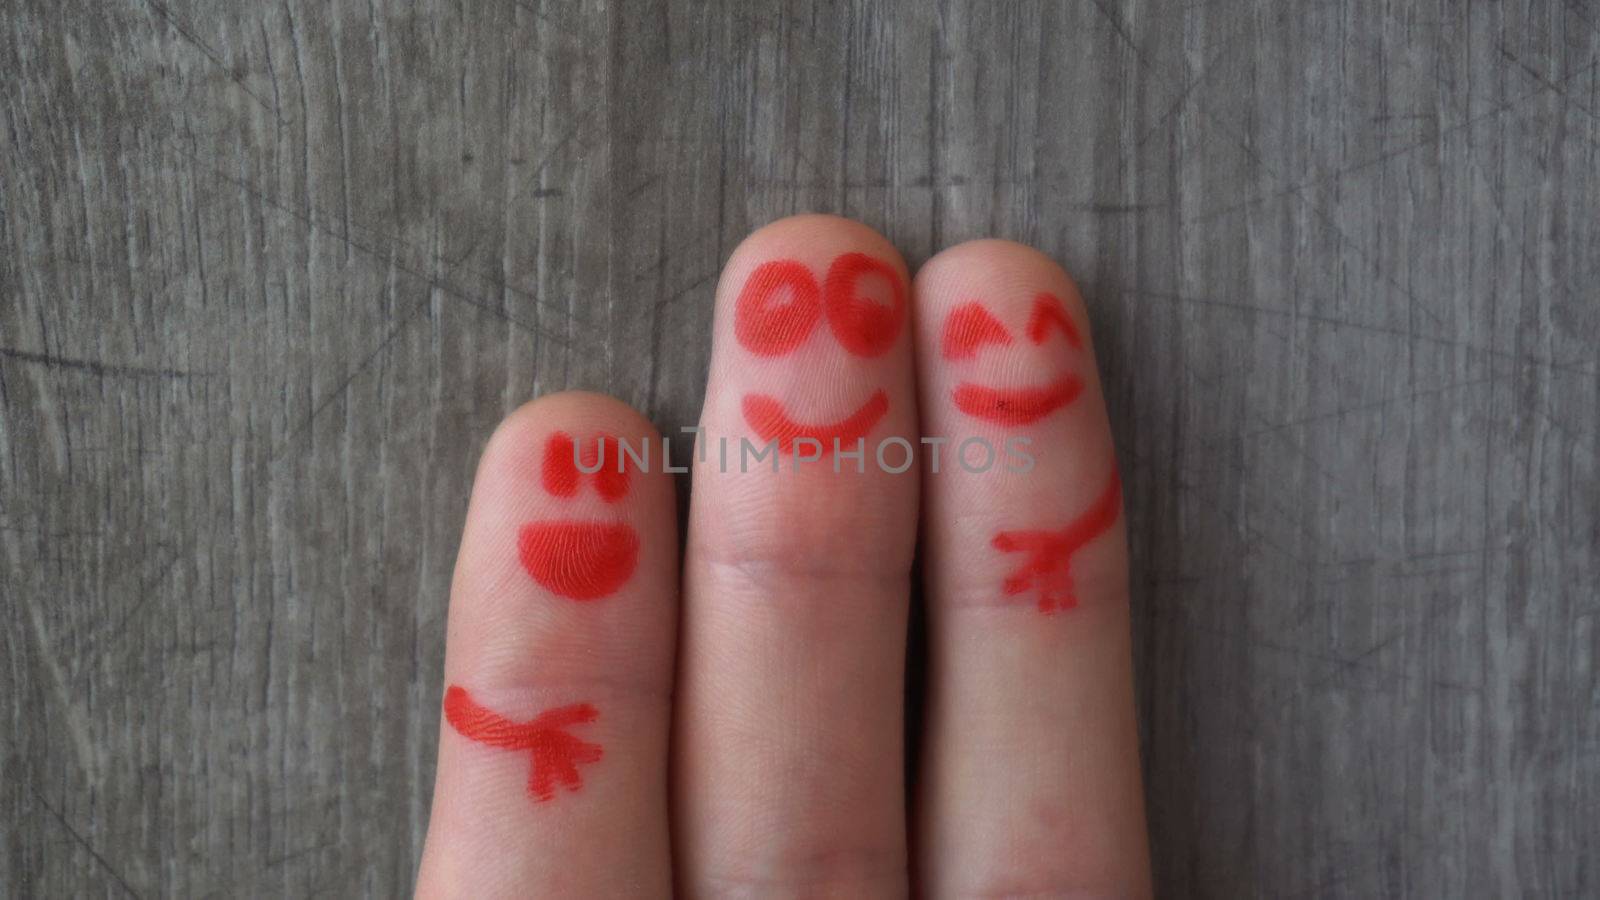 happy fingers.beautiful faces painted on the toes.